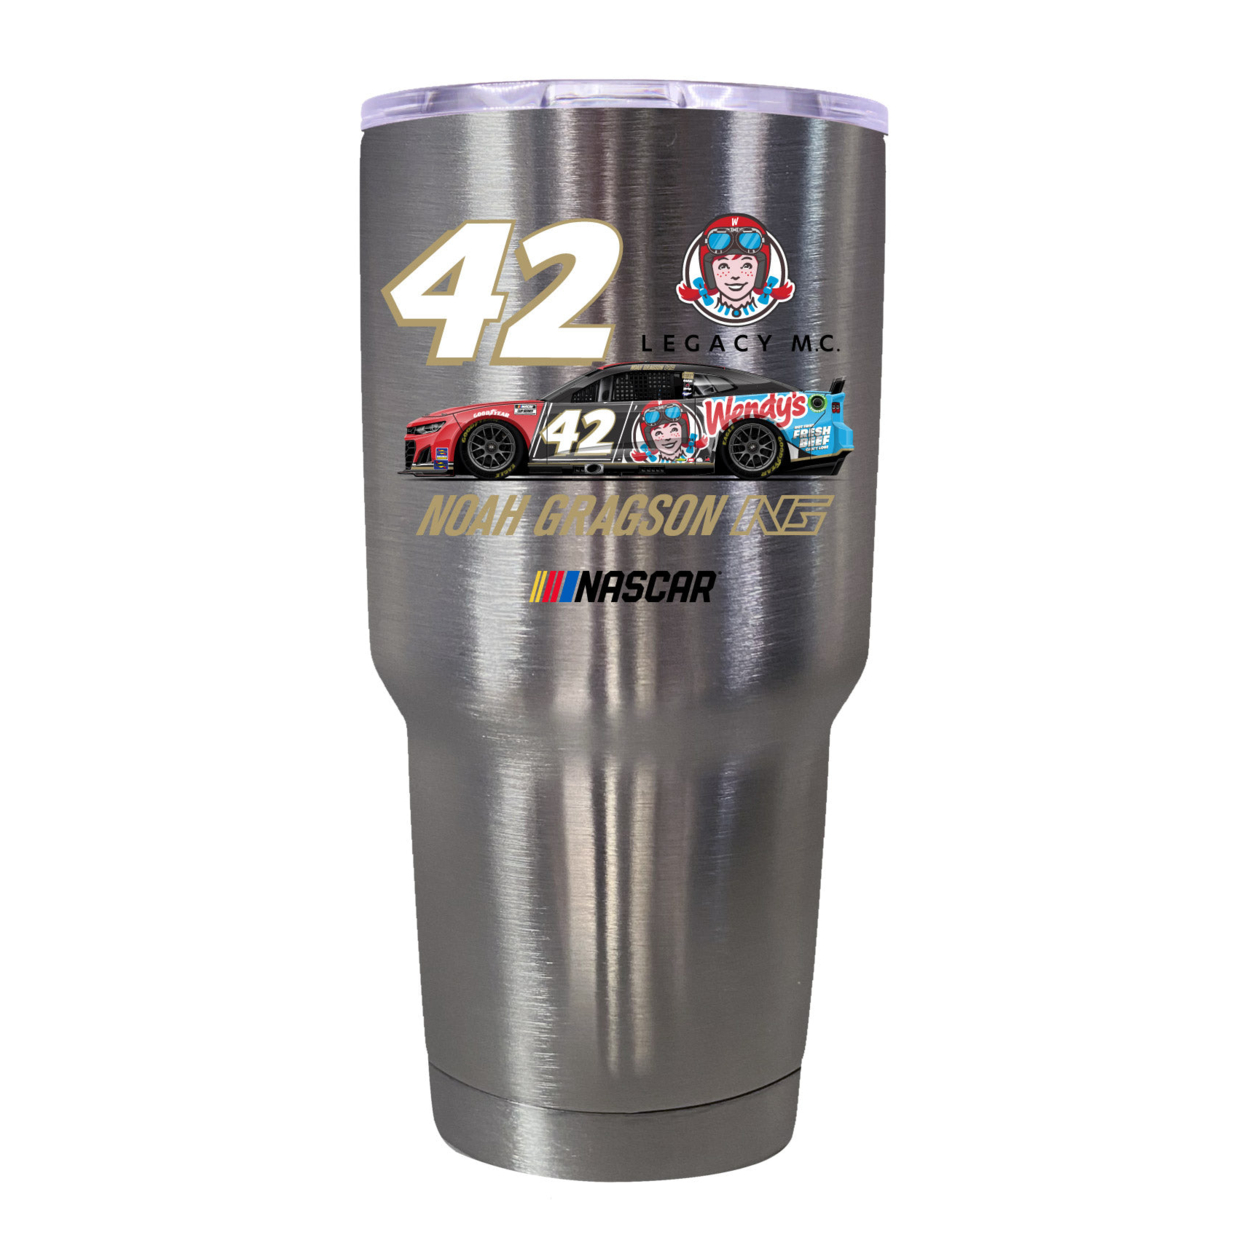 #42 Noah Gragson W Officially Licensed 24oz Stainless Steel Tumbler - Red